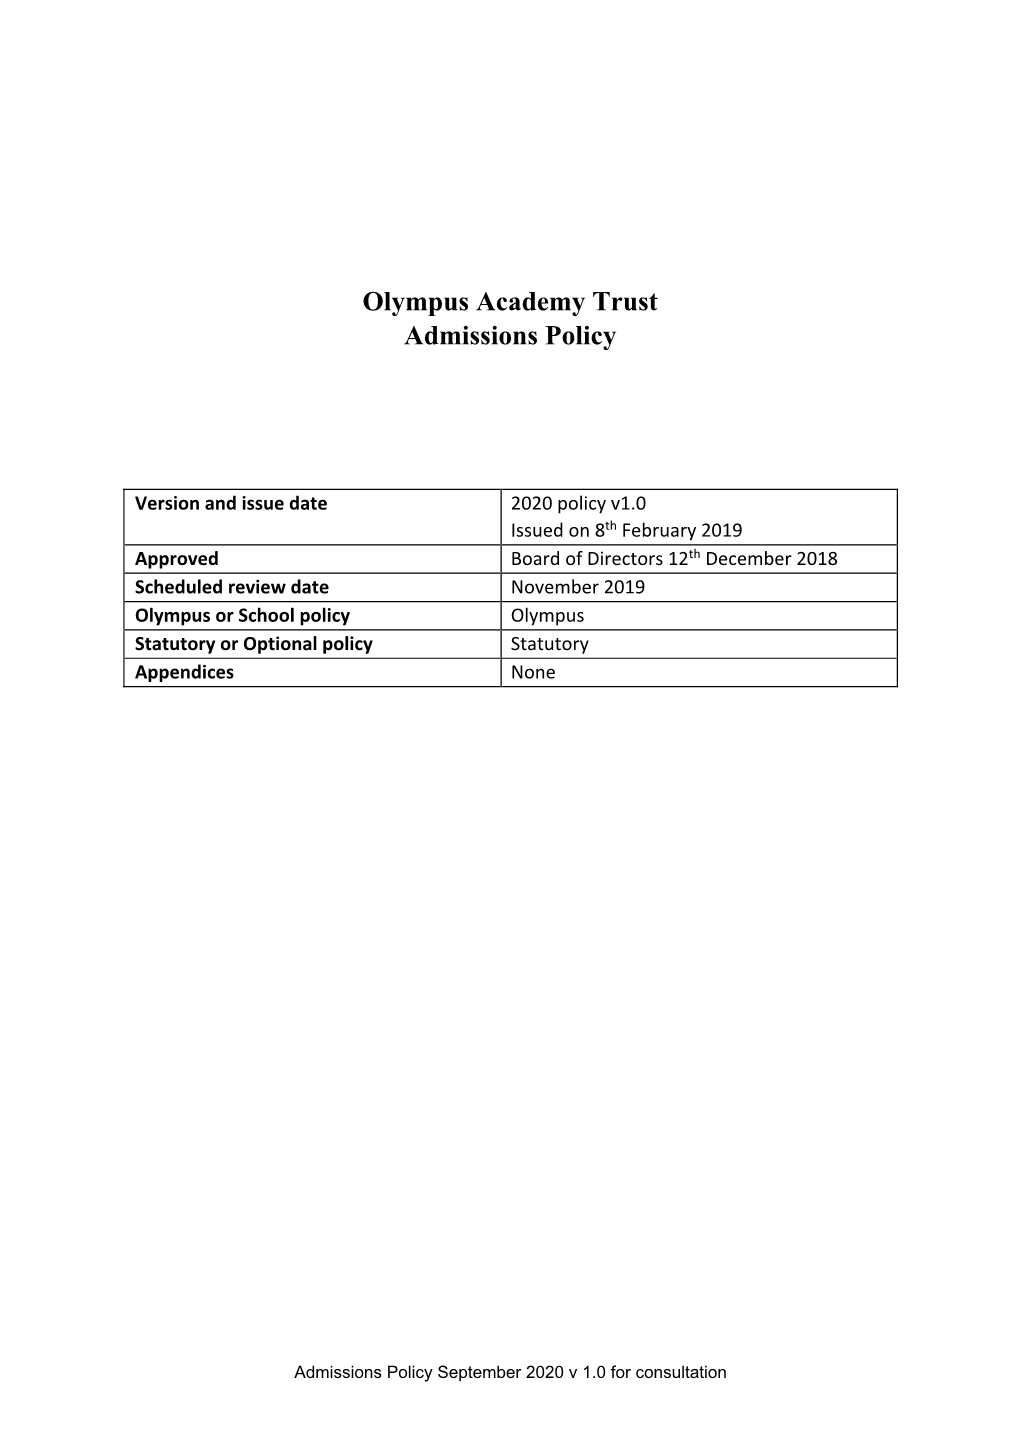 Olympus Academy Trust Admissions Policy